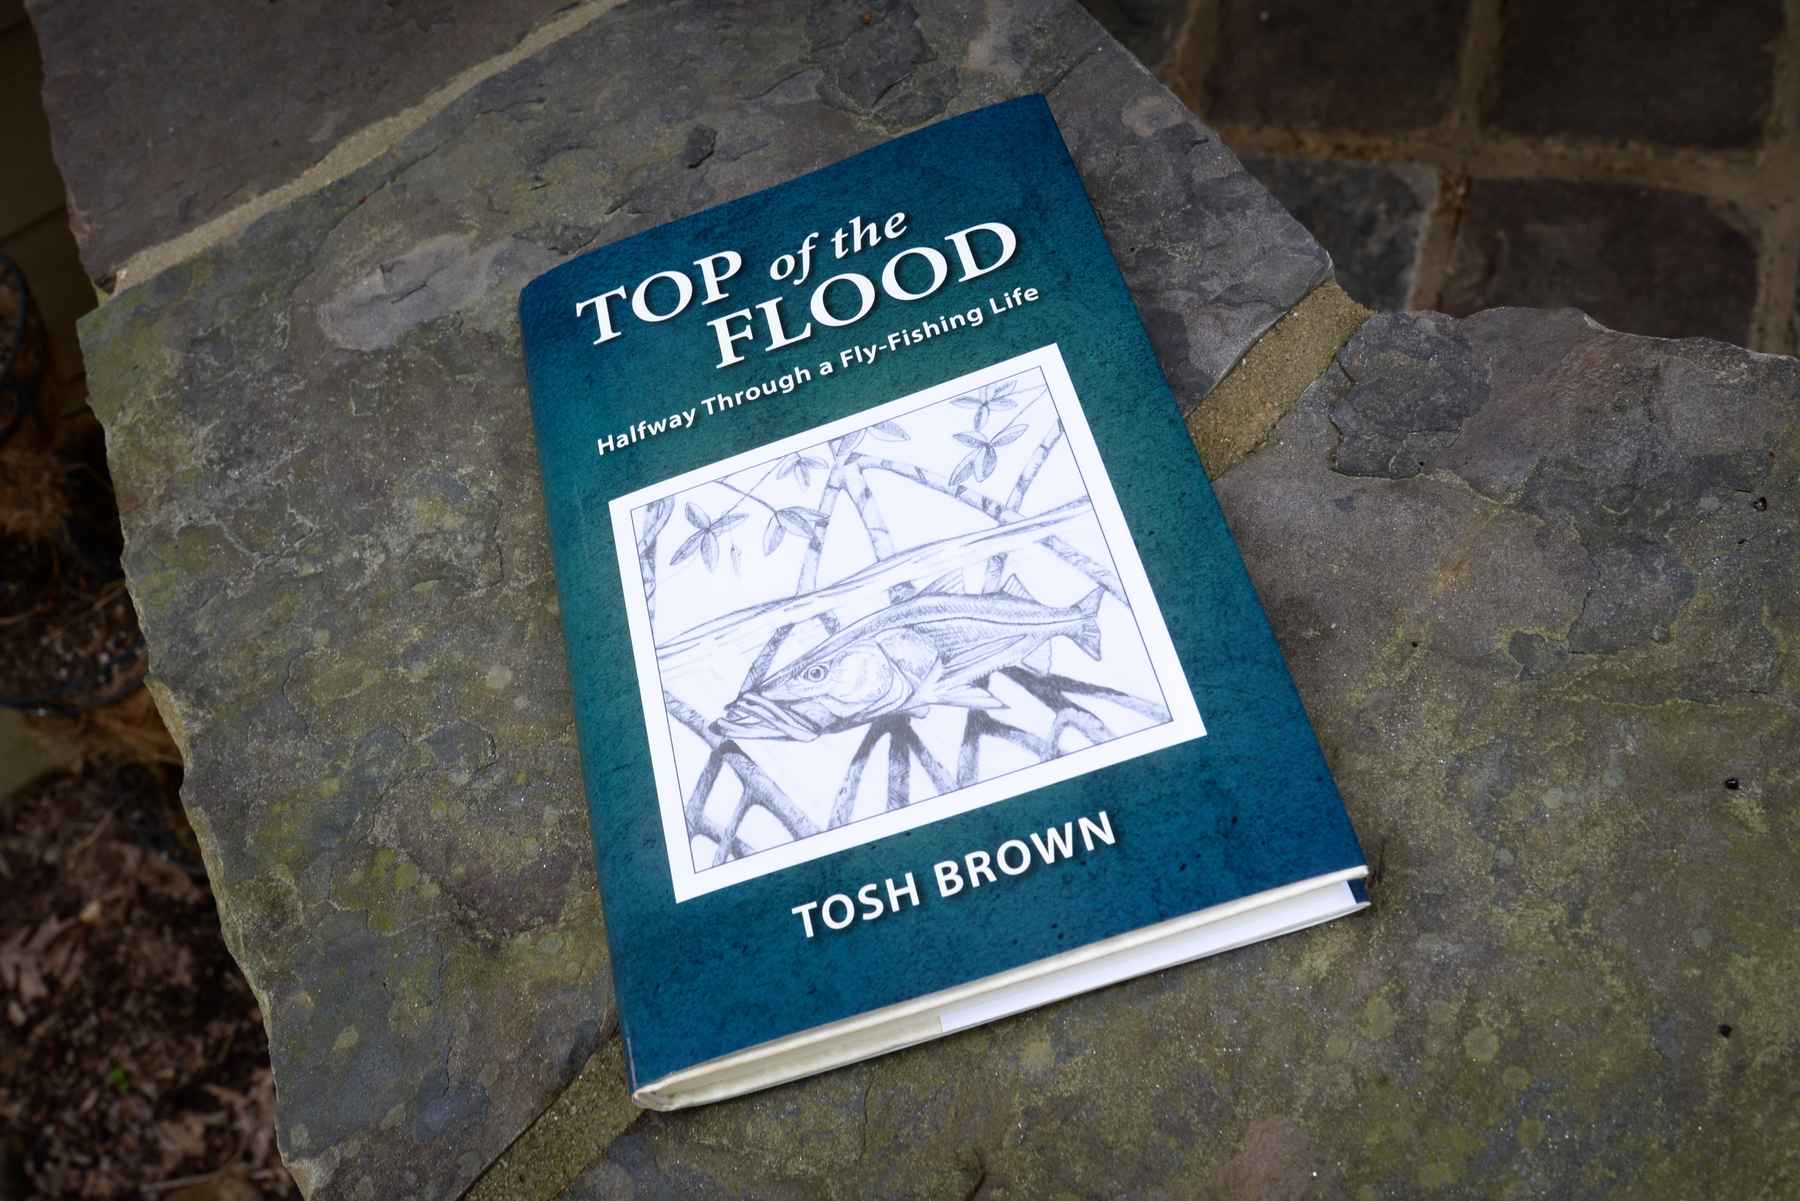 Book Review: Top of the Flood - Halfway Through a Fly Fishing Life